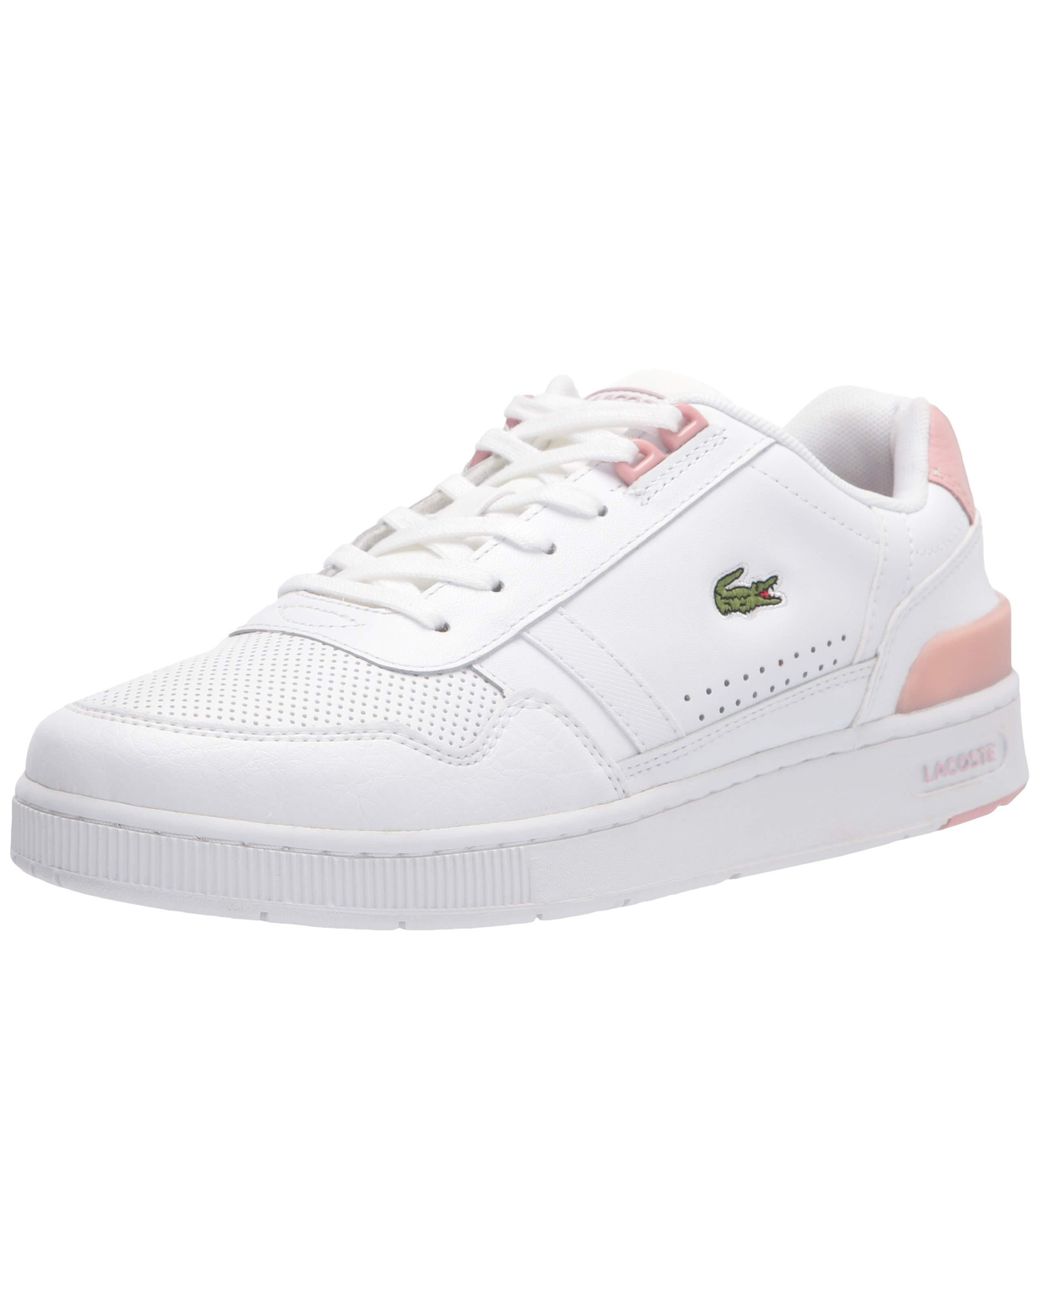 Lacoste T-clip 0120 4 Sfa Sneaker in White/Light Pink (White) - Save 23% -  Lyst